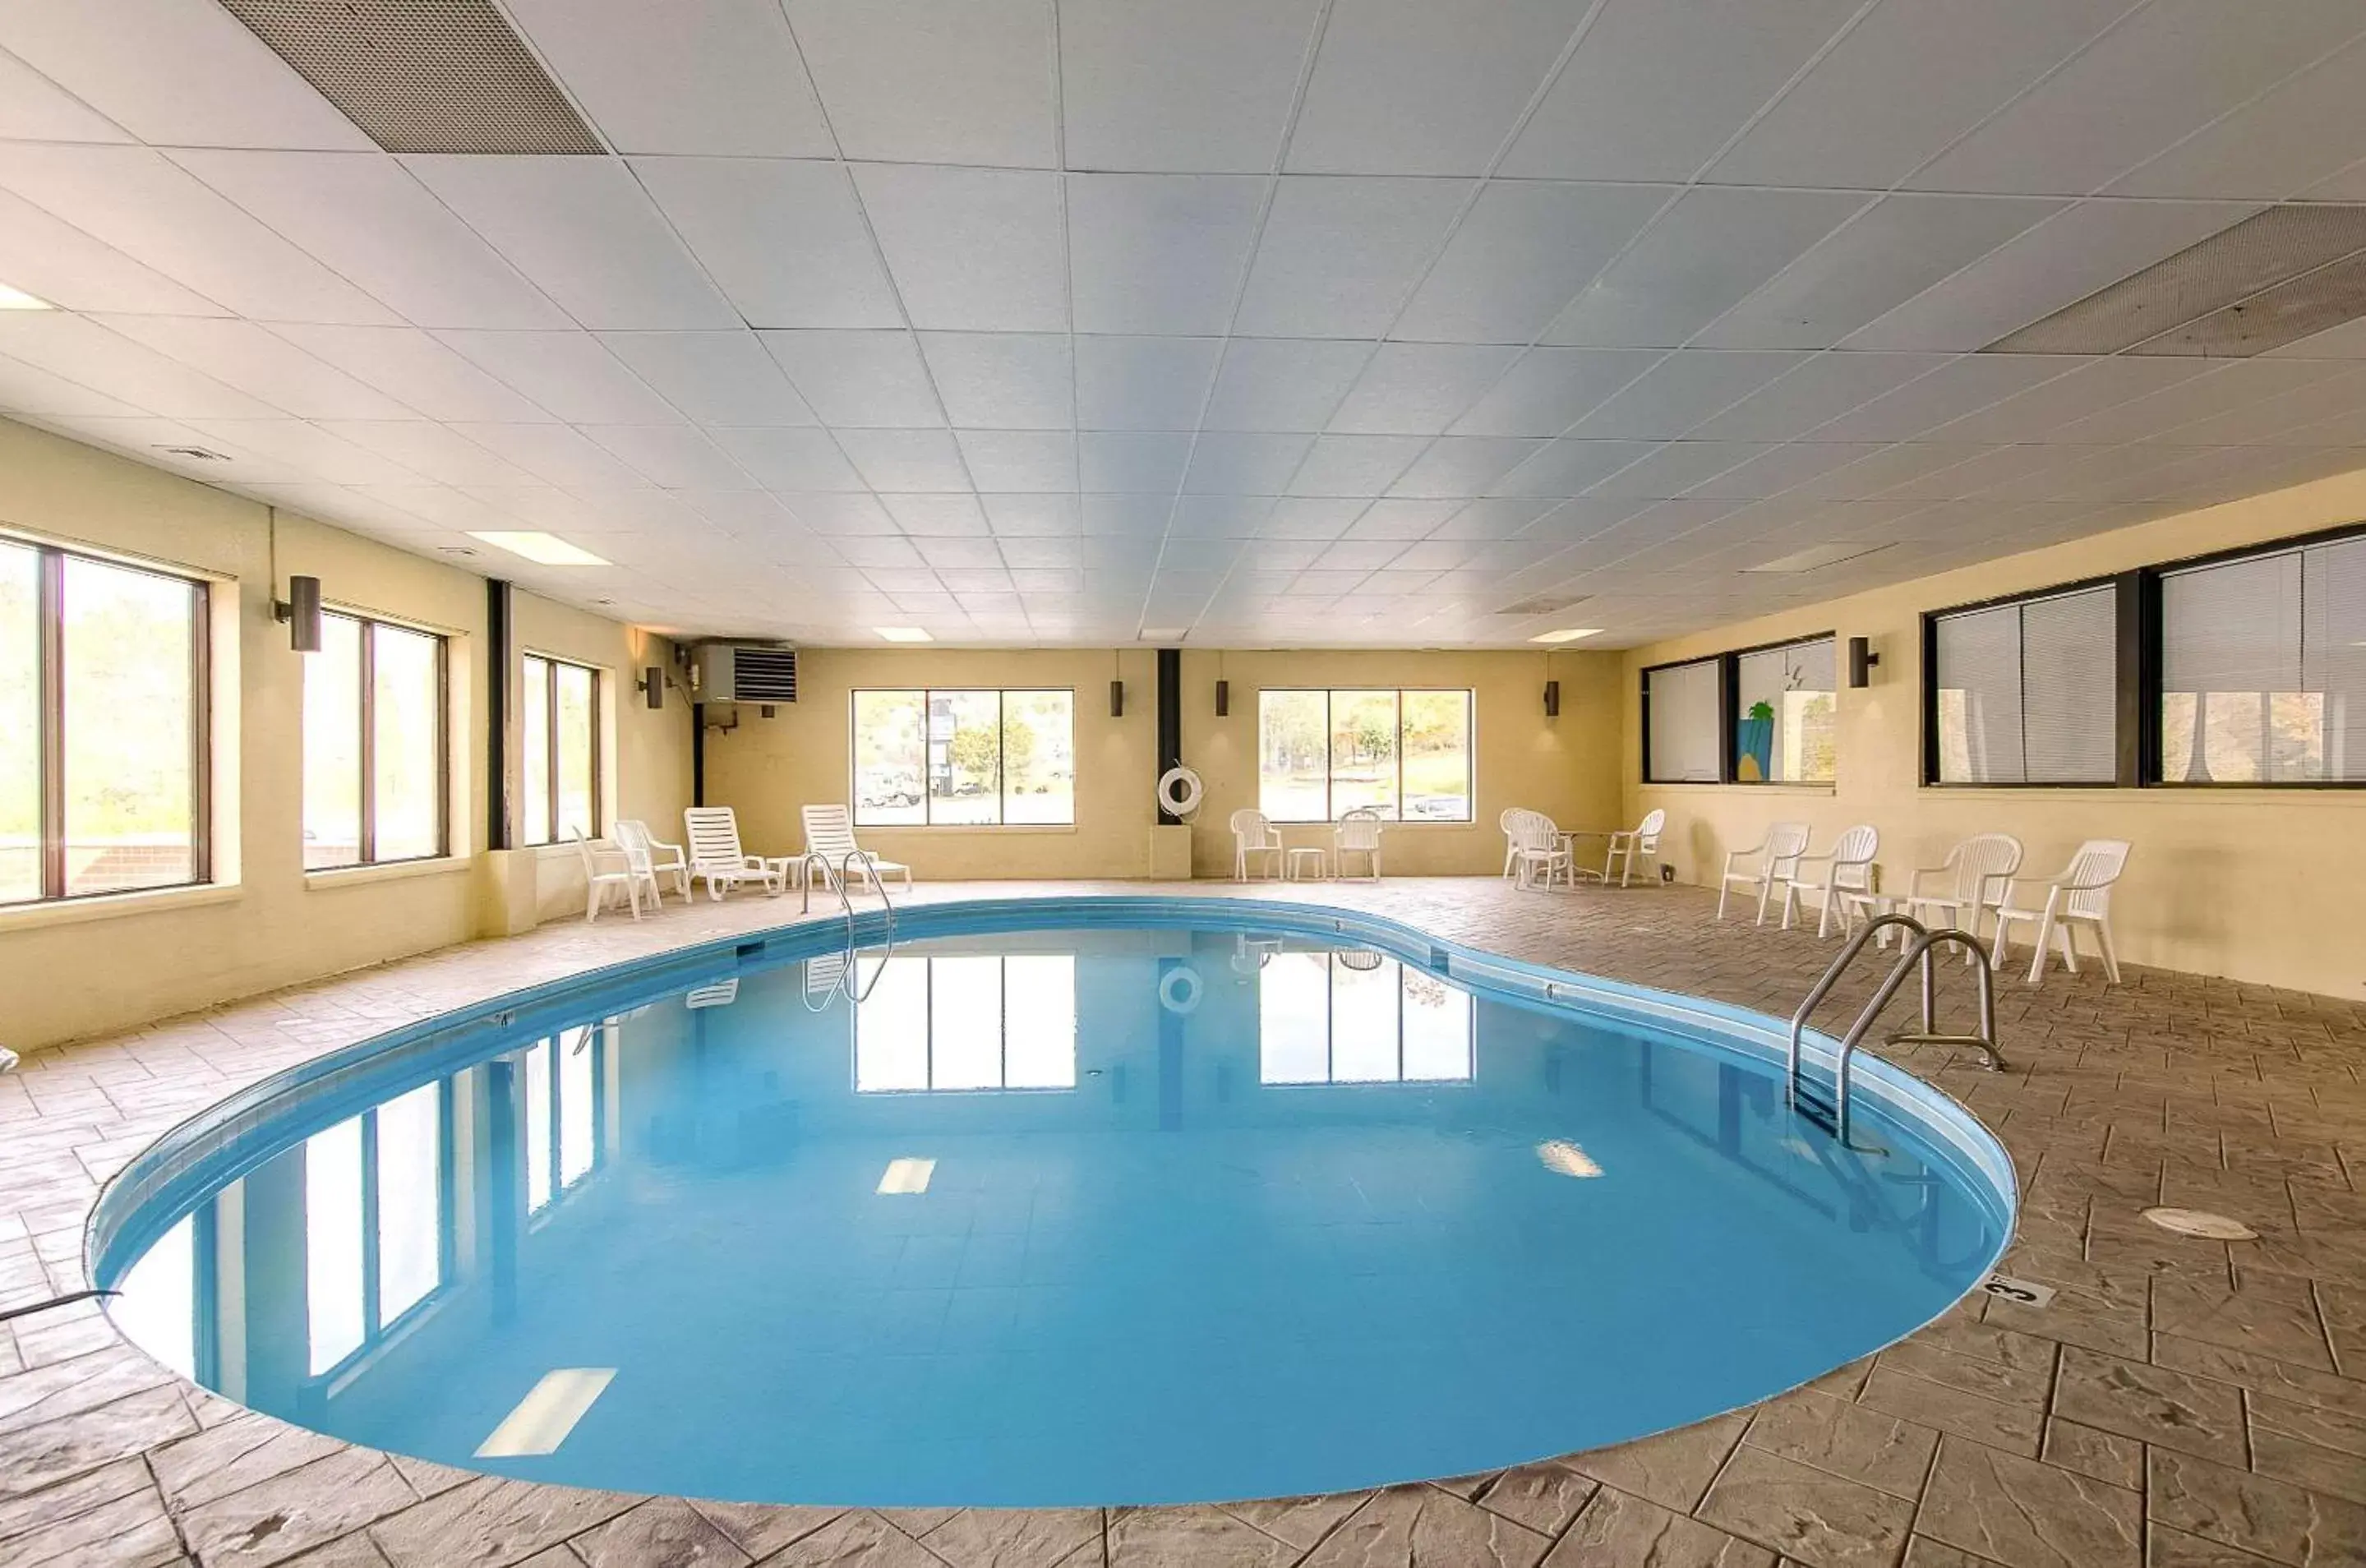 On site, Swimming Pool in Quality Inn & Suites Lexington near I-64 and I-81